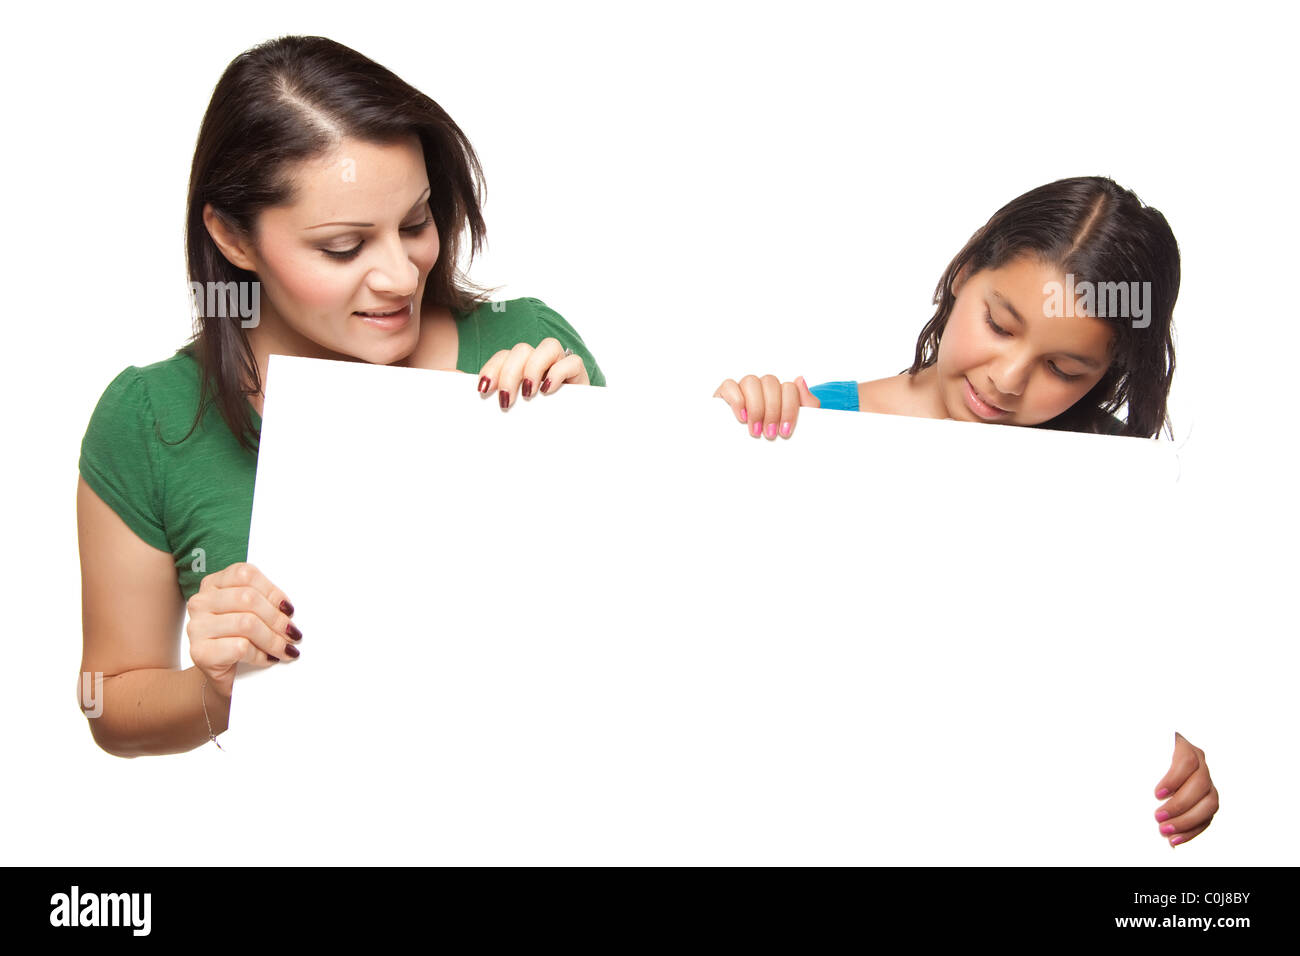 Hispanic Girl and Mother Holding Blank Board Isolated on a White Background. Stock Photo